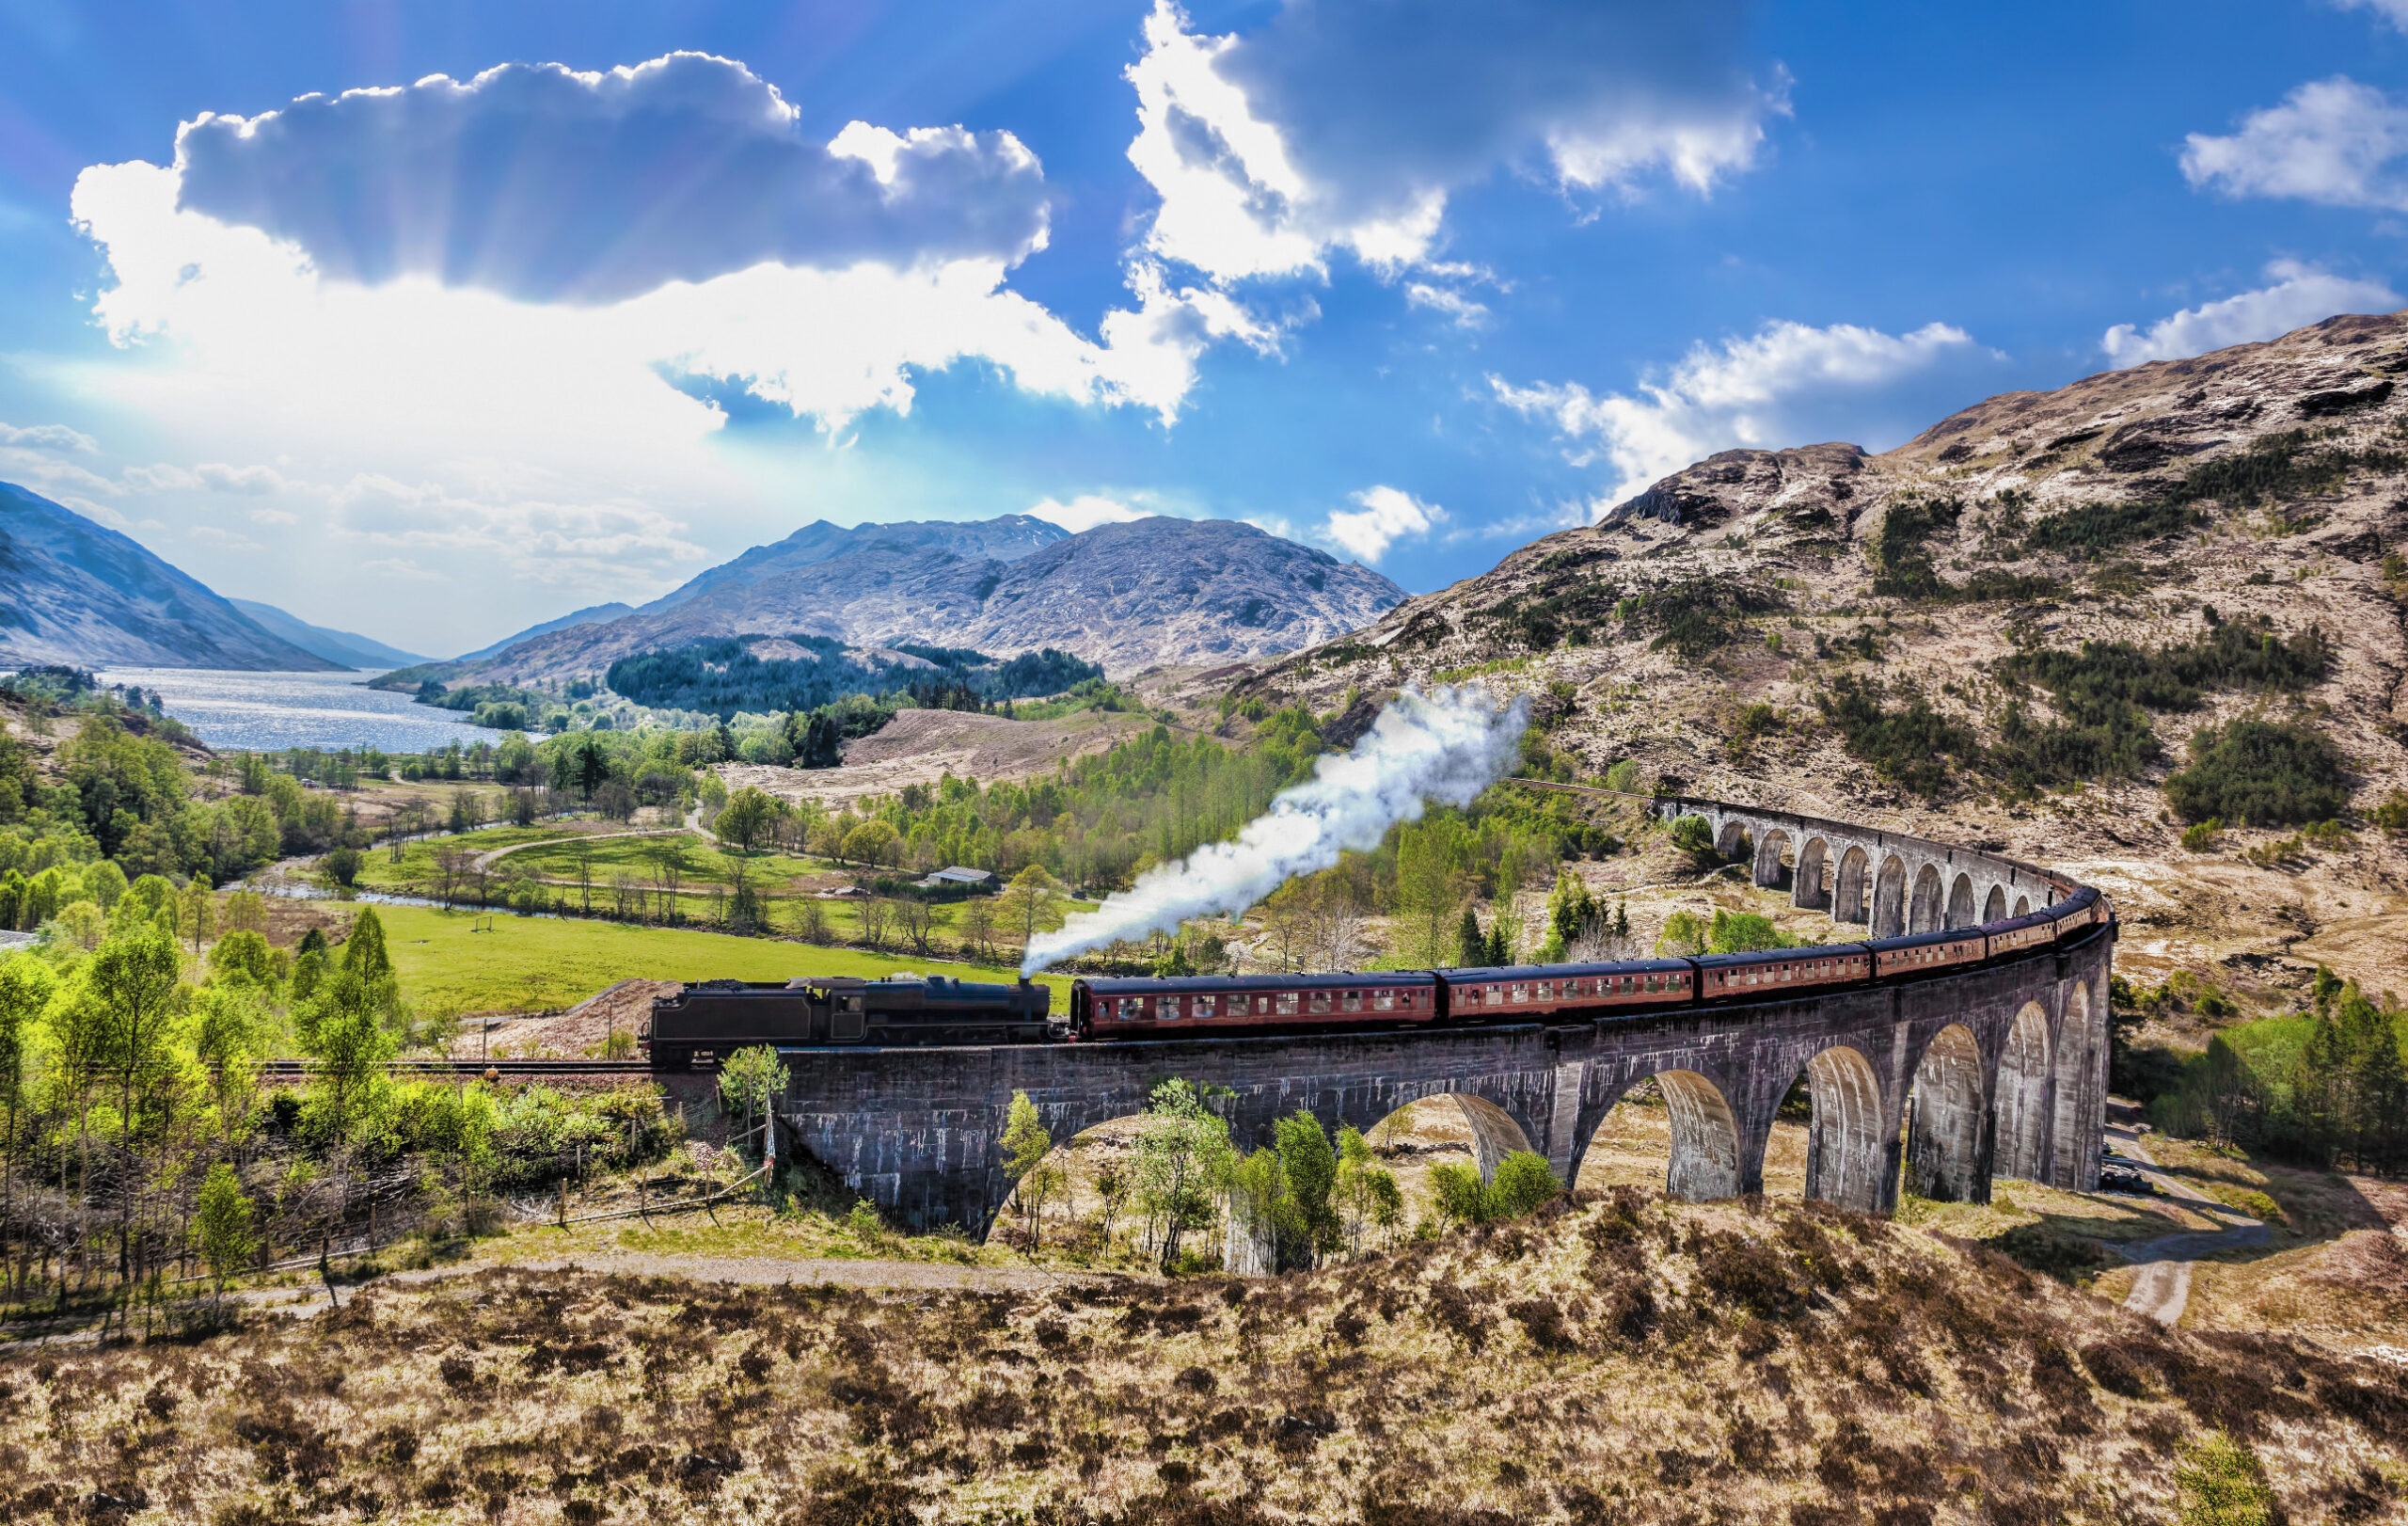 <p>Harry Potter fans, rejoice! The Jacobite Steam Train in Scotland offers a magical journey through the <a href="https://travel.usnews.com/Scottish_Highlands_Scotland/Things_To_Do/">Scottish Highlands,</a> and considered one of the most scenic train journeys around the world. This historic train ride will transport you to a world of rolling hills, shimmering lochs, and the iconic Glenfinnan Viaduct – instantly recognizable from the movies. Whether you’re a die-hard wizarding enthusiast or simply love a good steam train adventure, the Jacobite promises a truly enchanting experience that will leave you feeling a bit magical. For an extra dose of nostalgia, consider booking afternoon tea service onboard for a classic British experience.</p>